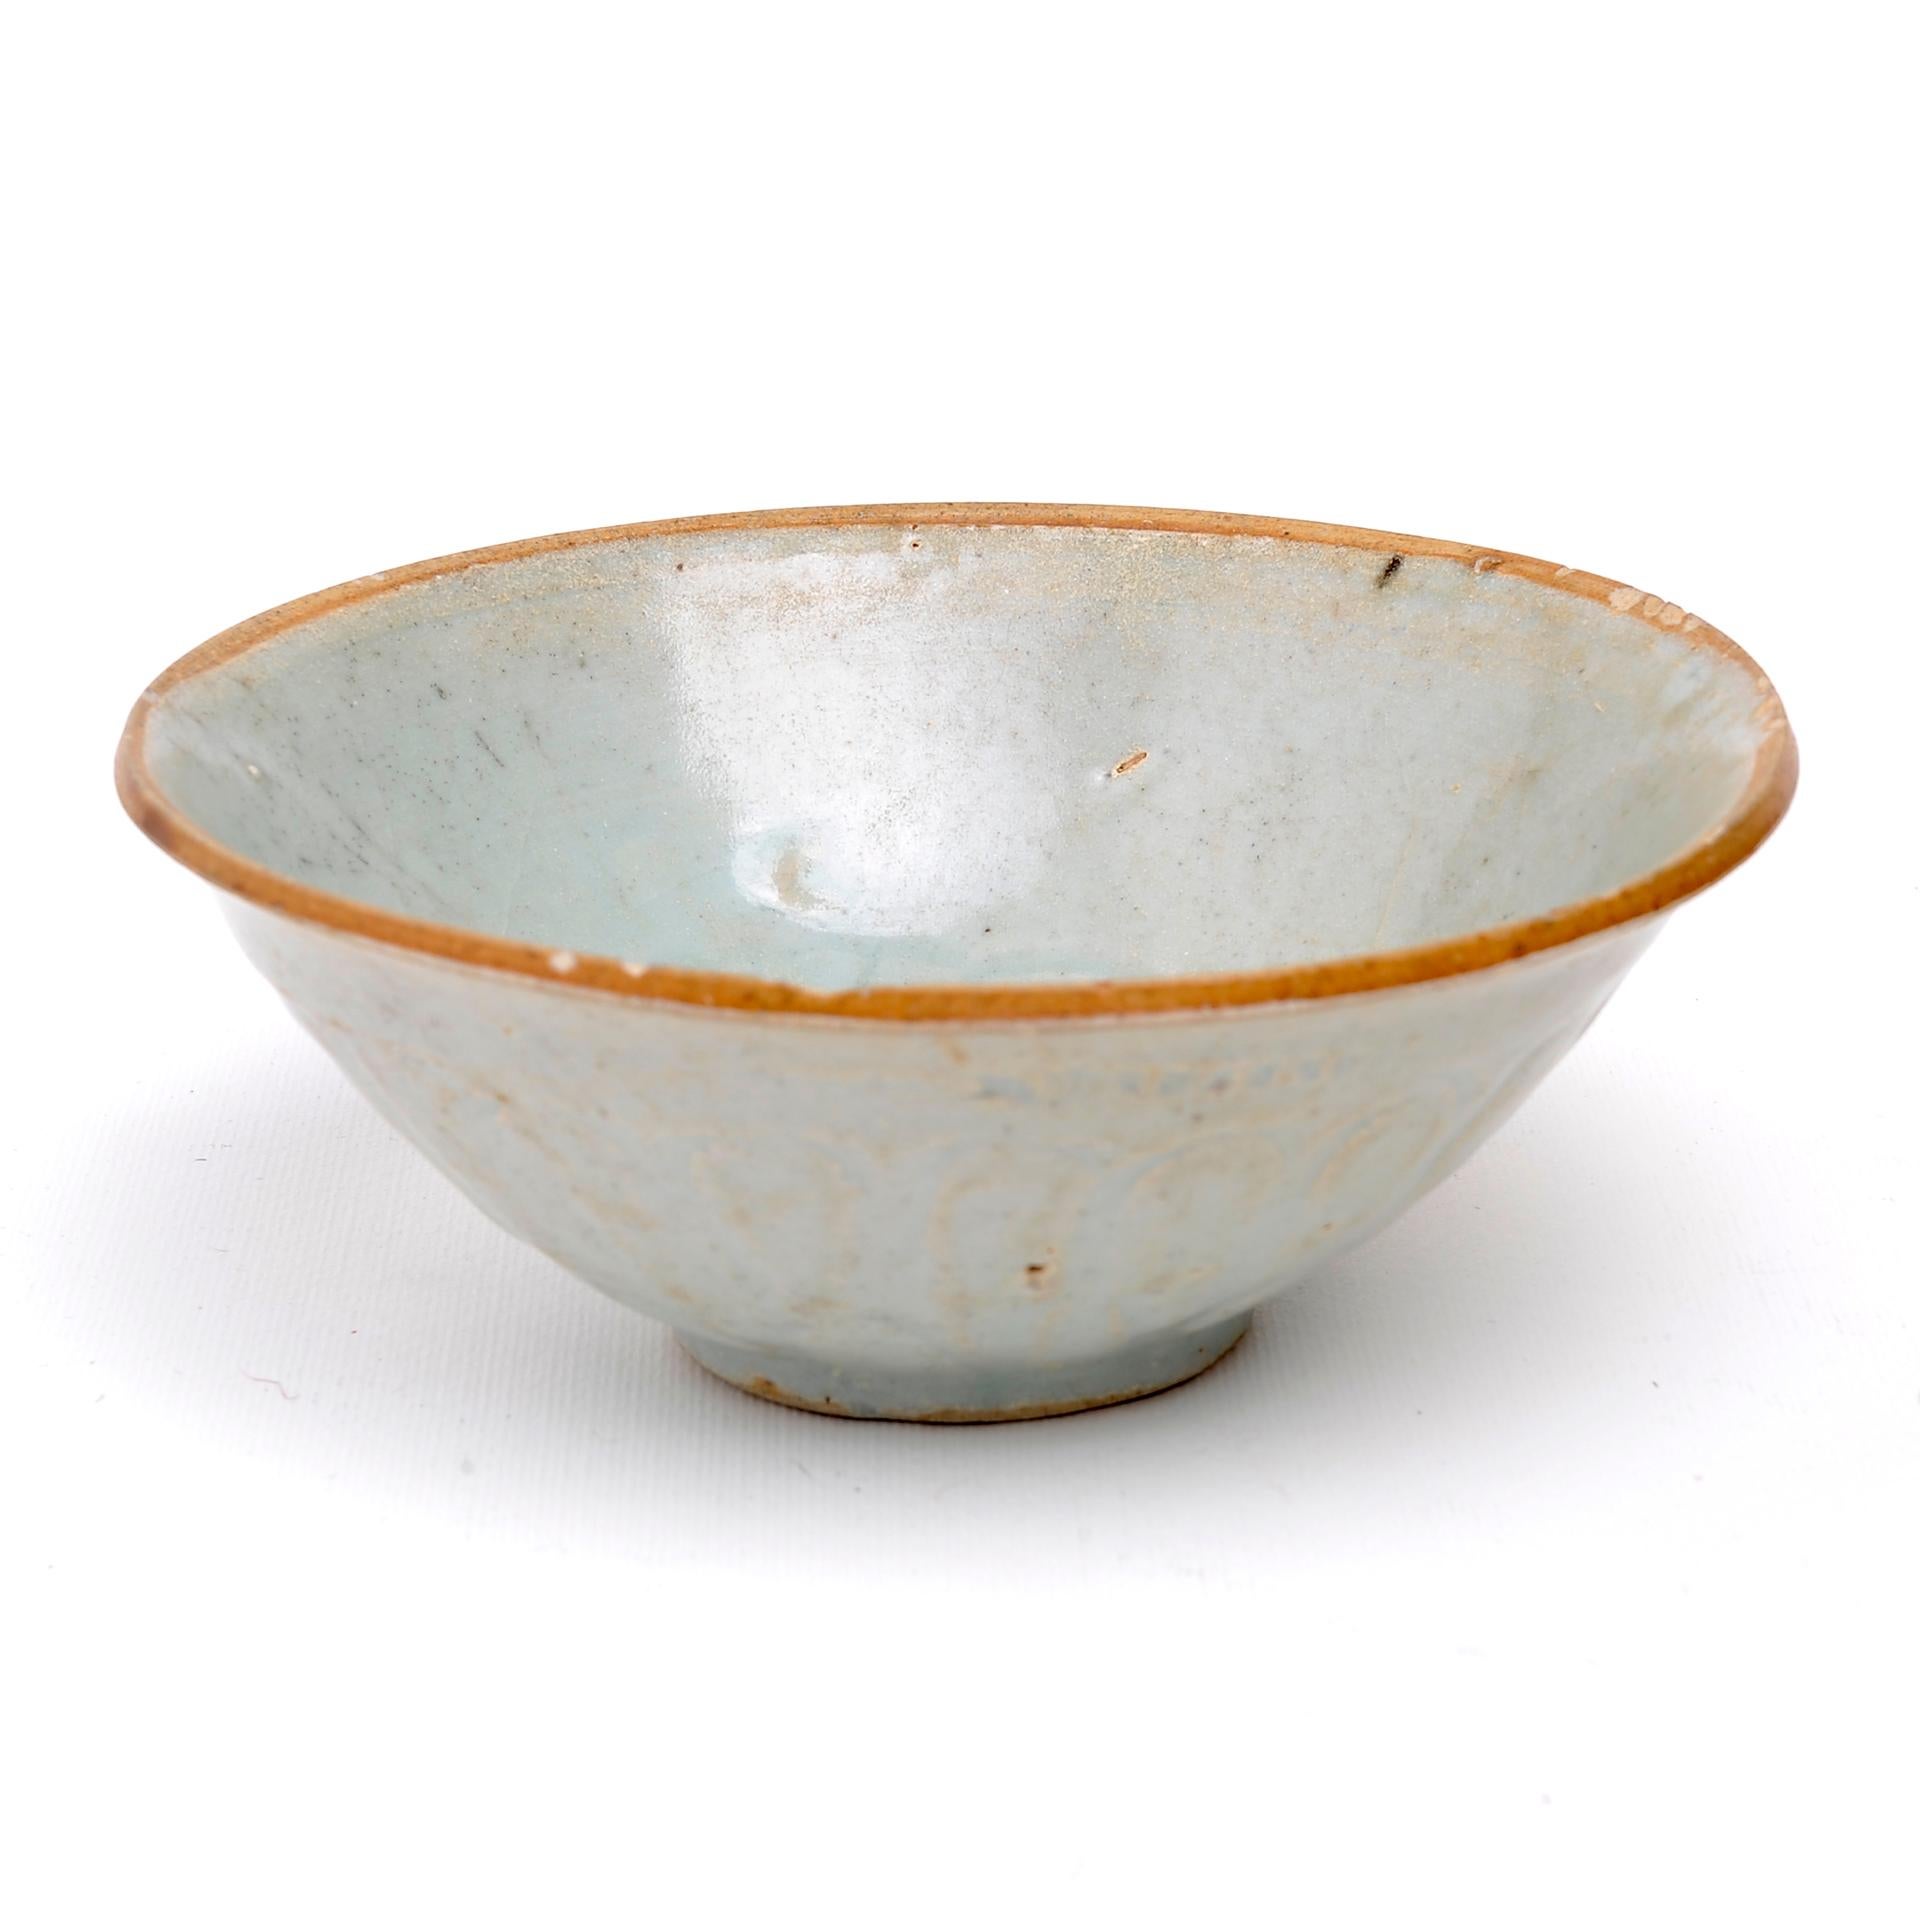 Antique chinese bowl from my private collection, now on sale after 35 years and never exhibited to the public.
This little bowl is very fine, simply elegant, for any use on any elegant table.